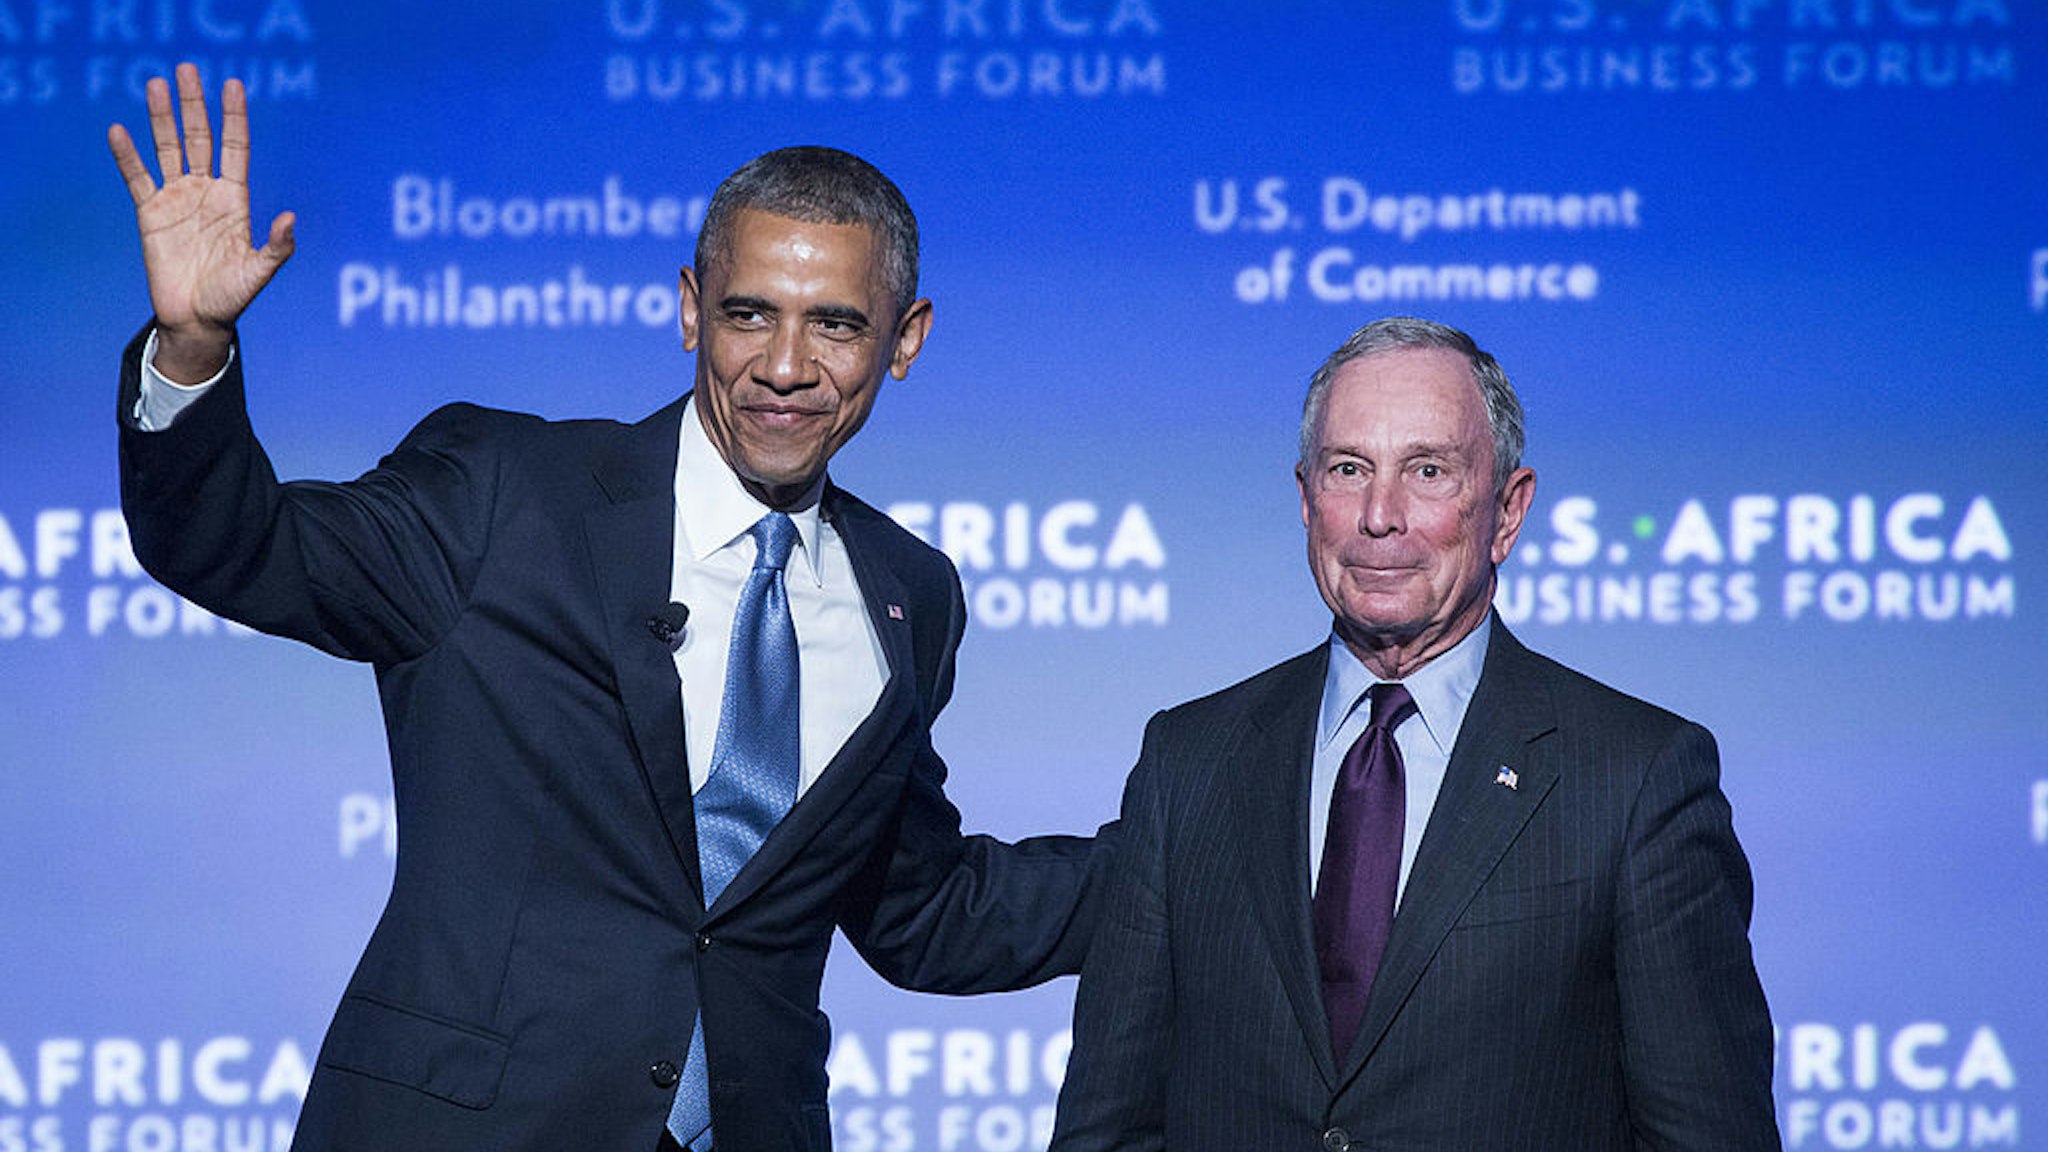 U.S. President Barack Obama, left, waves to the audience after being introduced by Michael Bloomberg, former mayor of New York, at the US-Africa Business Forum in Washington, D.C., U.S., on Tuesday, Aug. 5, 2014.